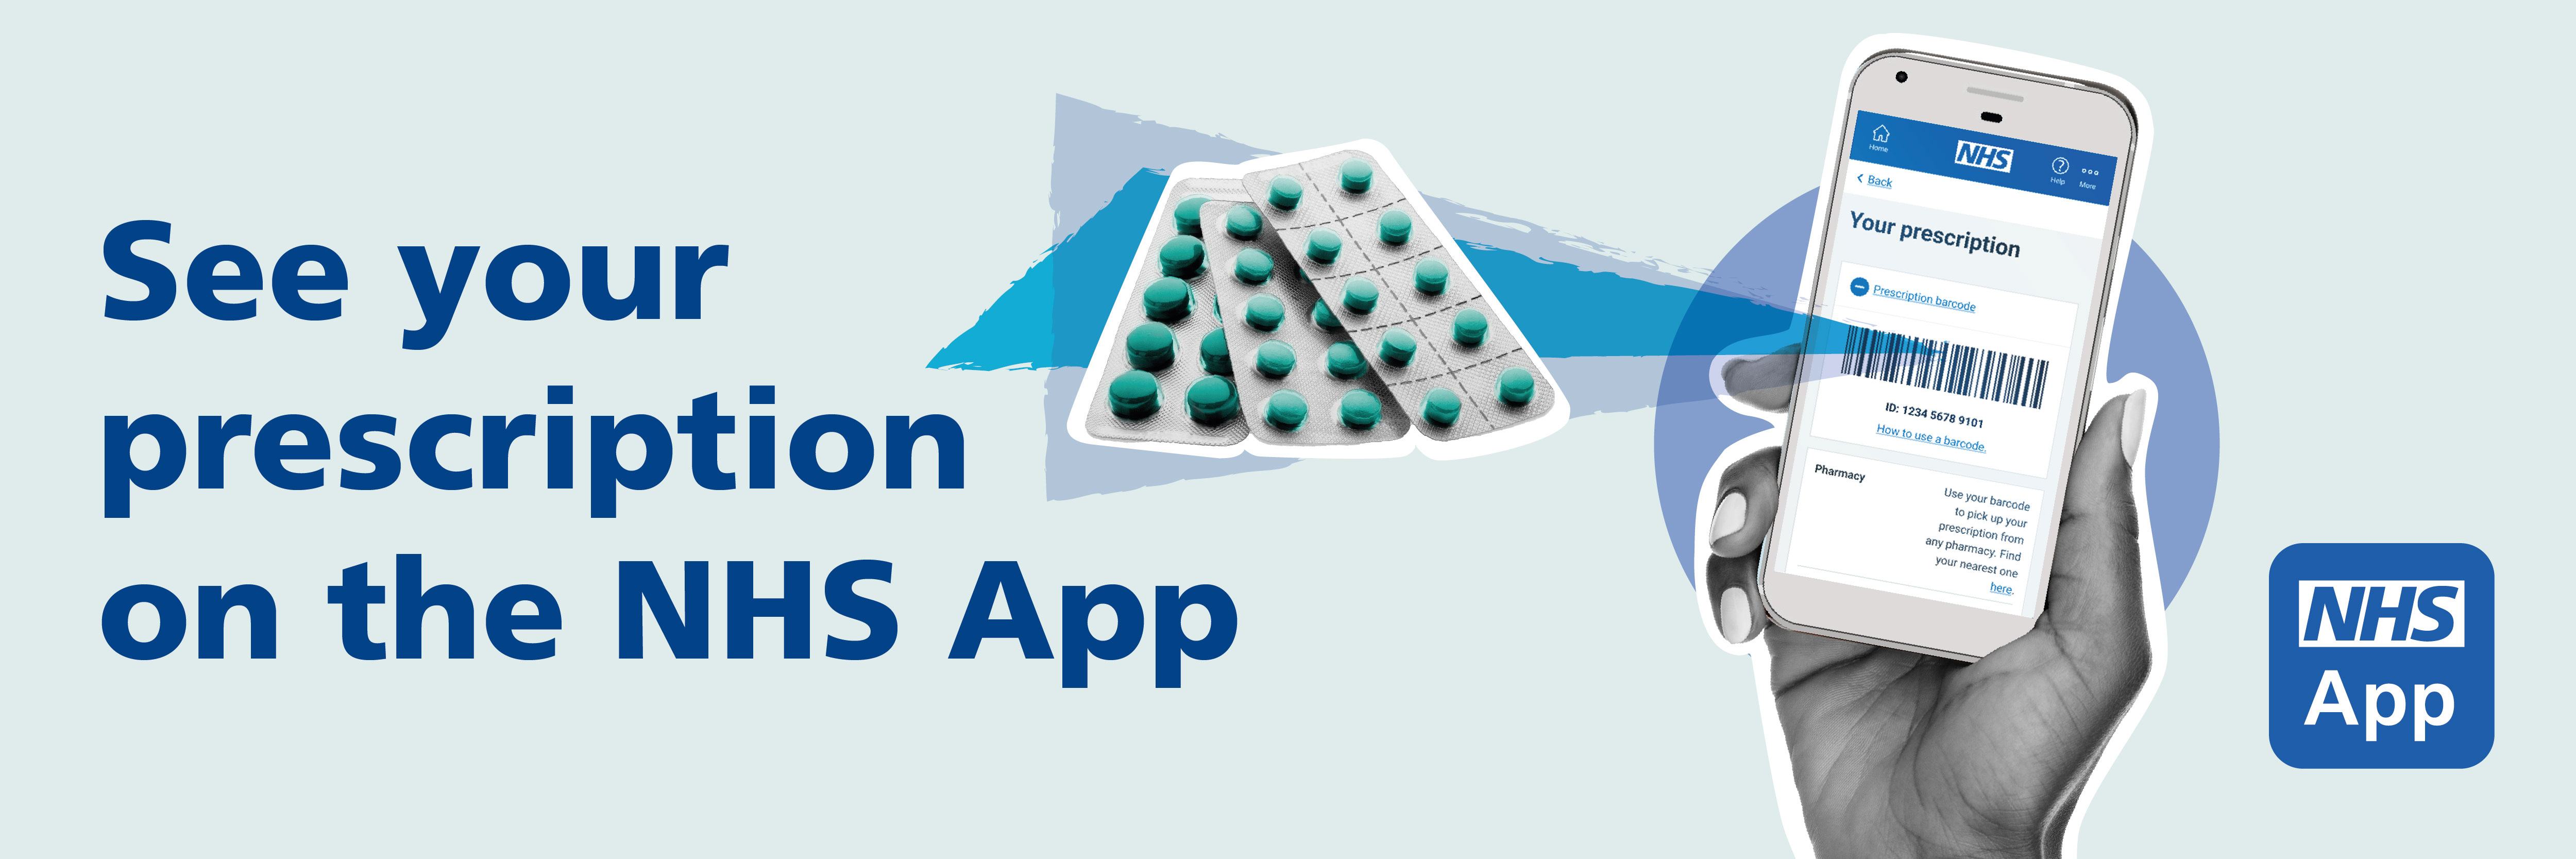 See your prescription on the NHS app